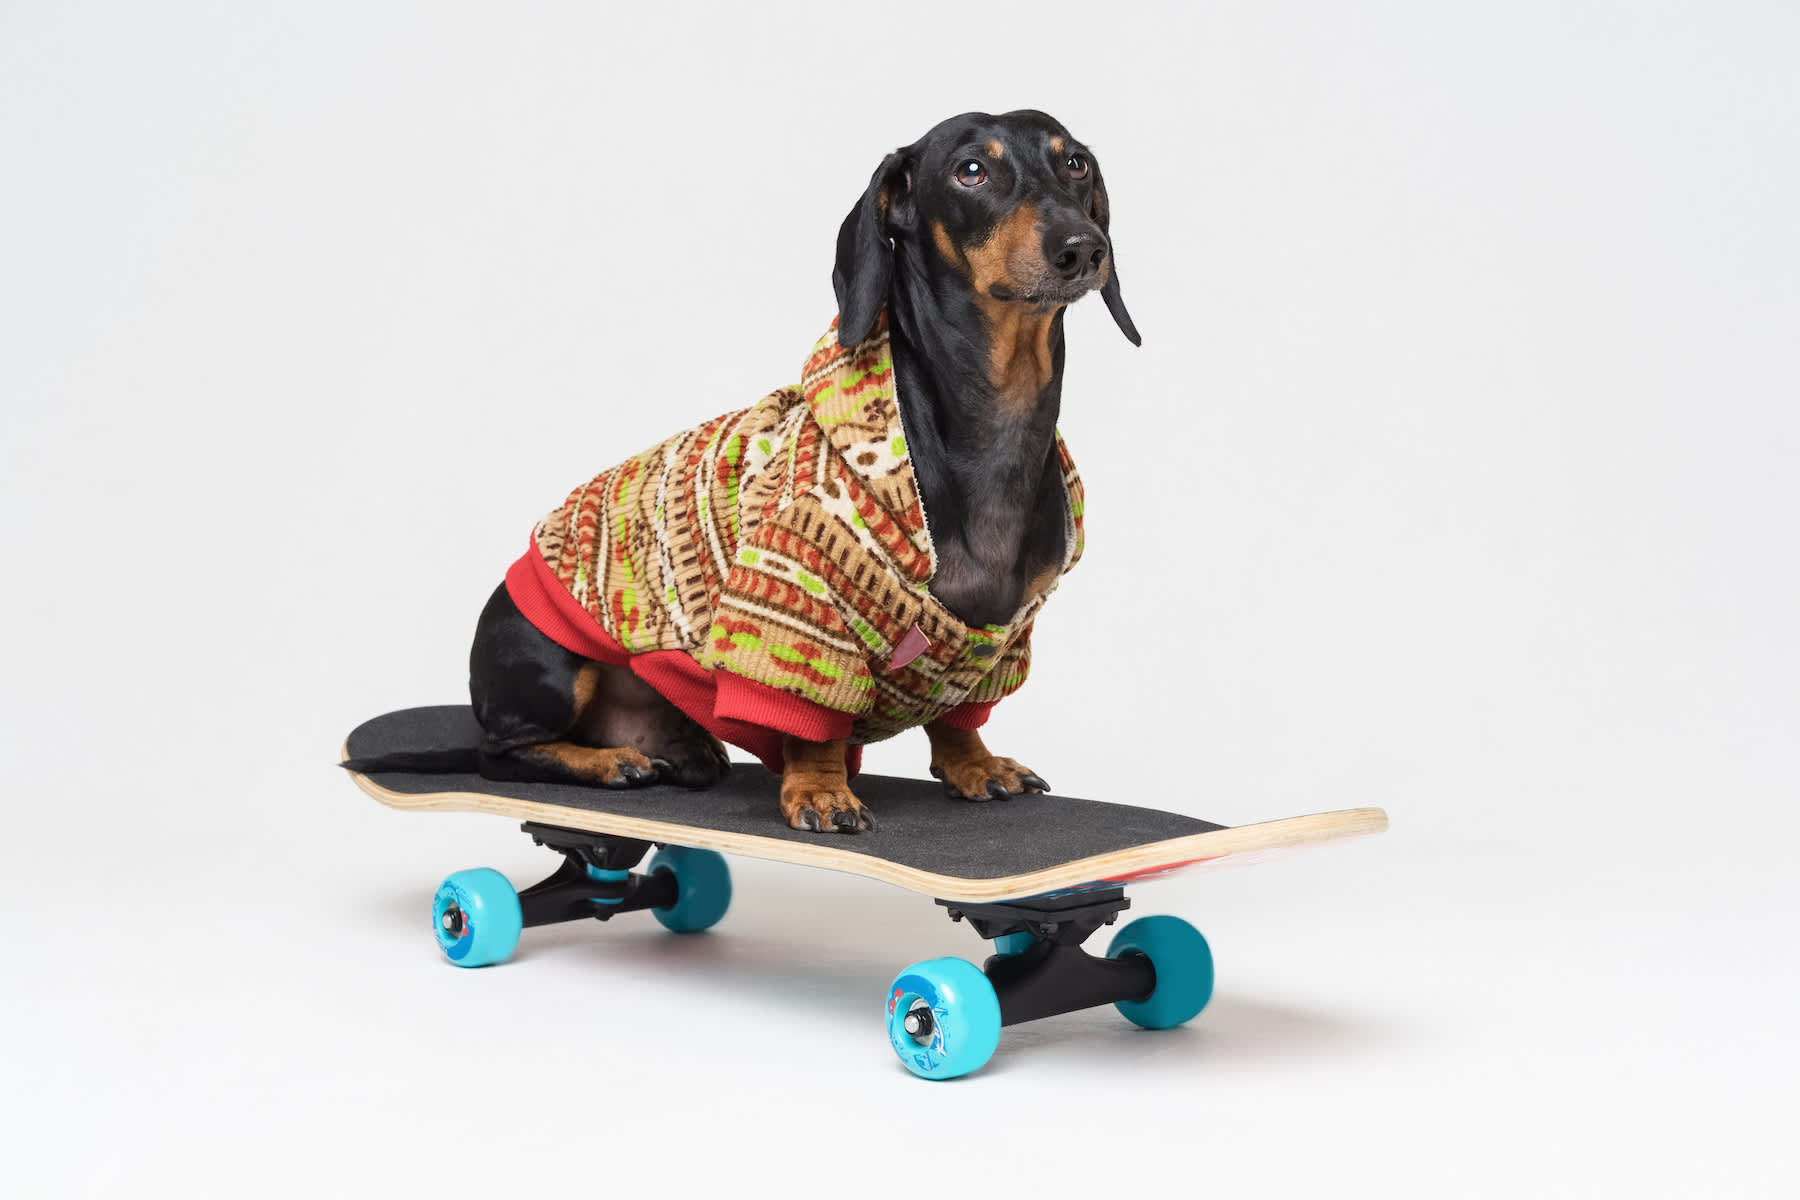 Canva - dog breed Dachshund, black and tan, sits on skateboard,dressed in a color sweater, isolated on gray background. Skateboarding dog.